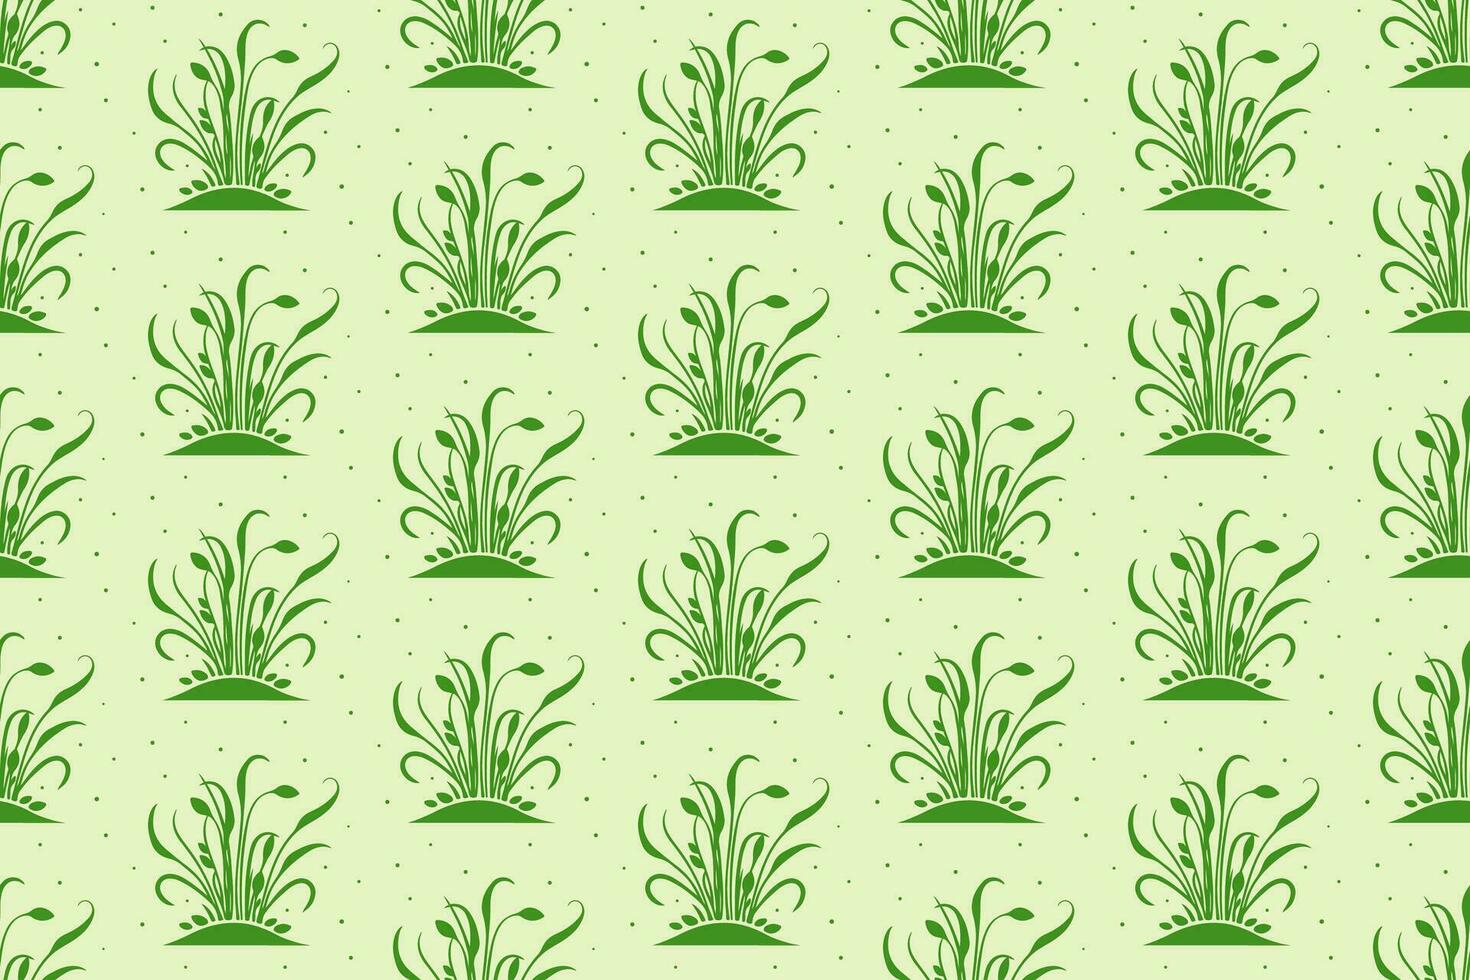 Microgreens Vector Seamless Pattern. Green Color Background. Healthy Organic Food and Spring Themes. For Wrapping Paper, Branding, Wallpaper and Textile